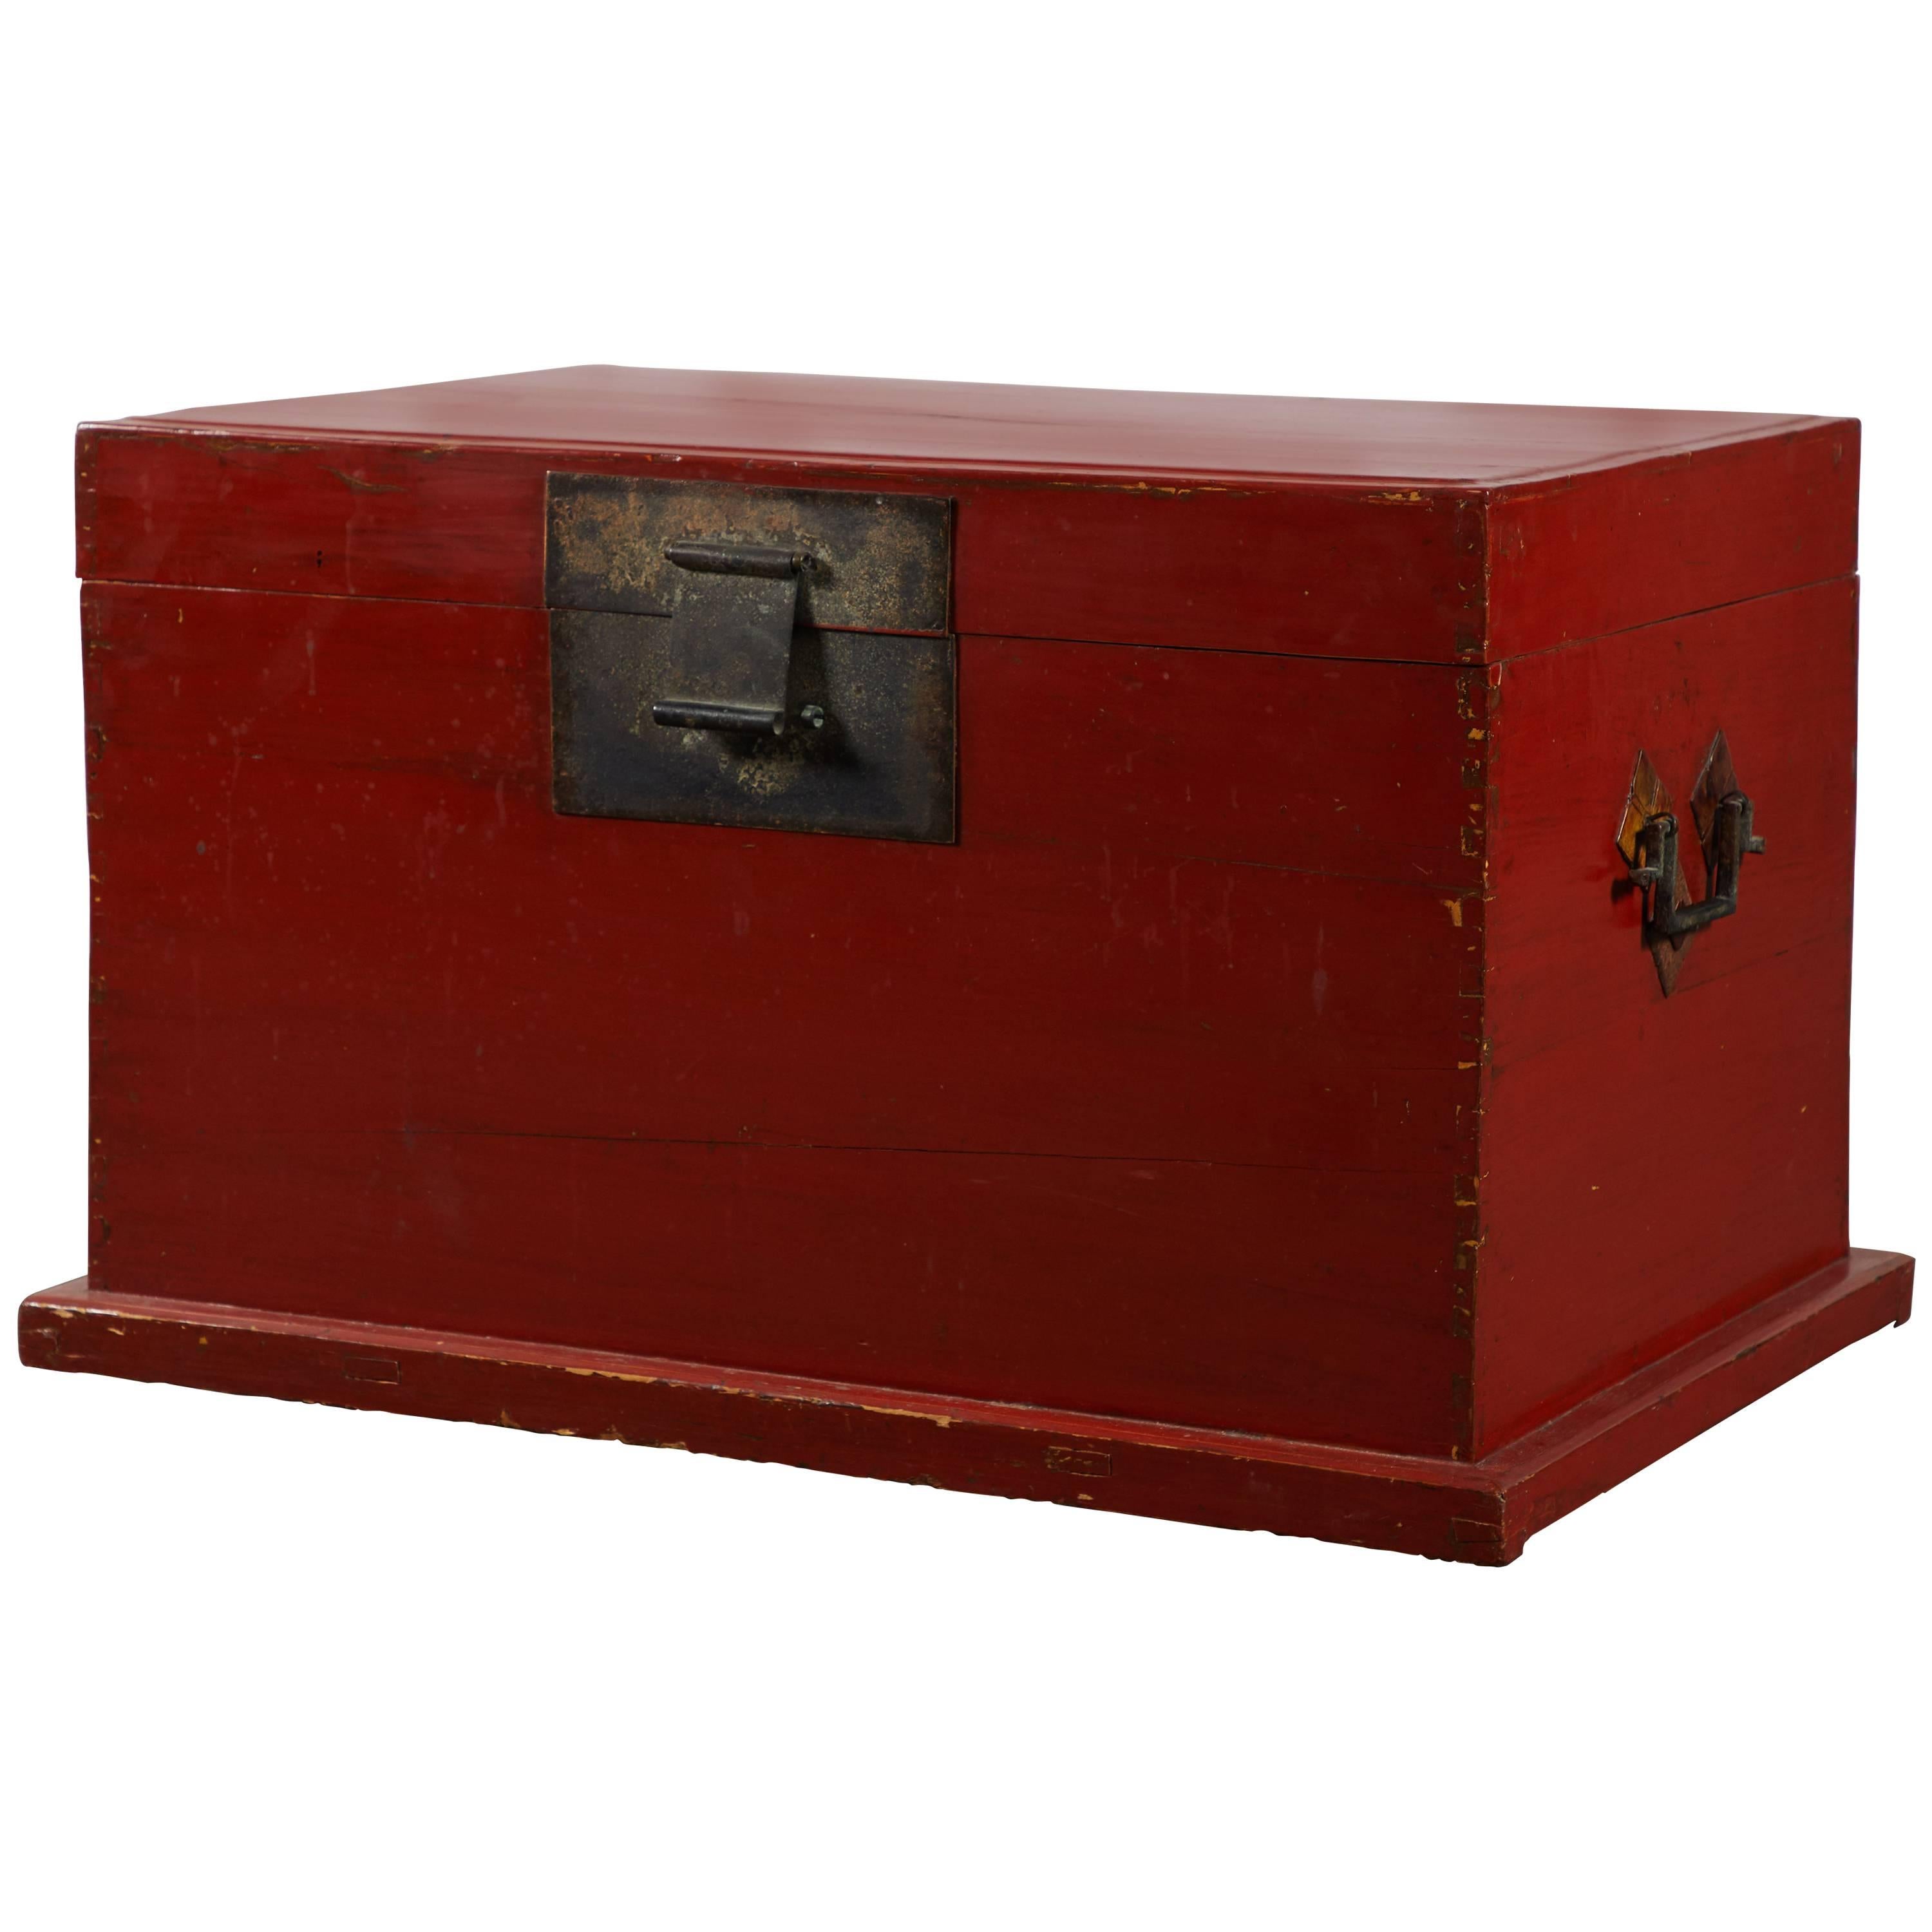 Late 19th Century Chinese Red Lacquer Trunk